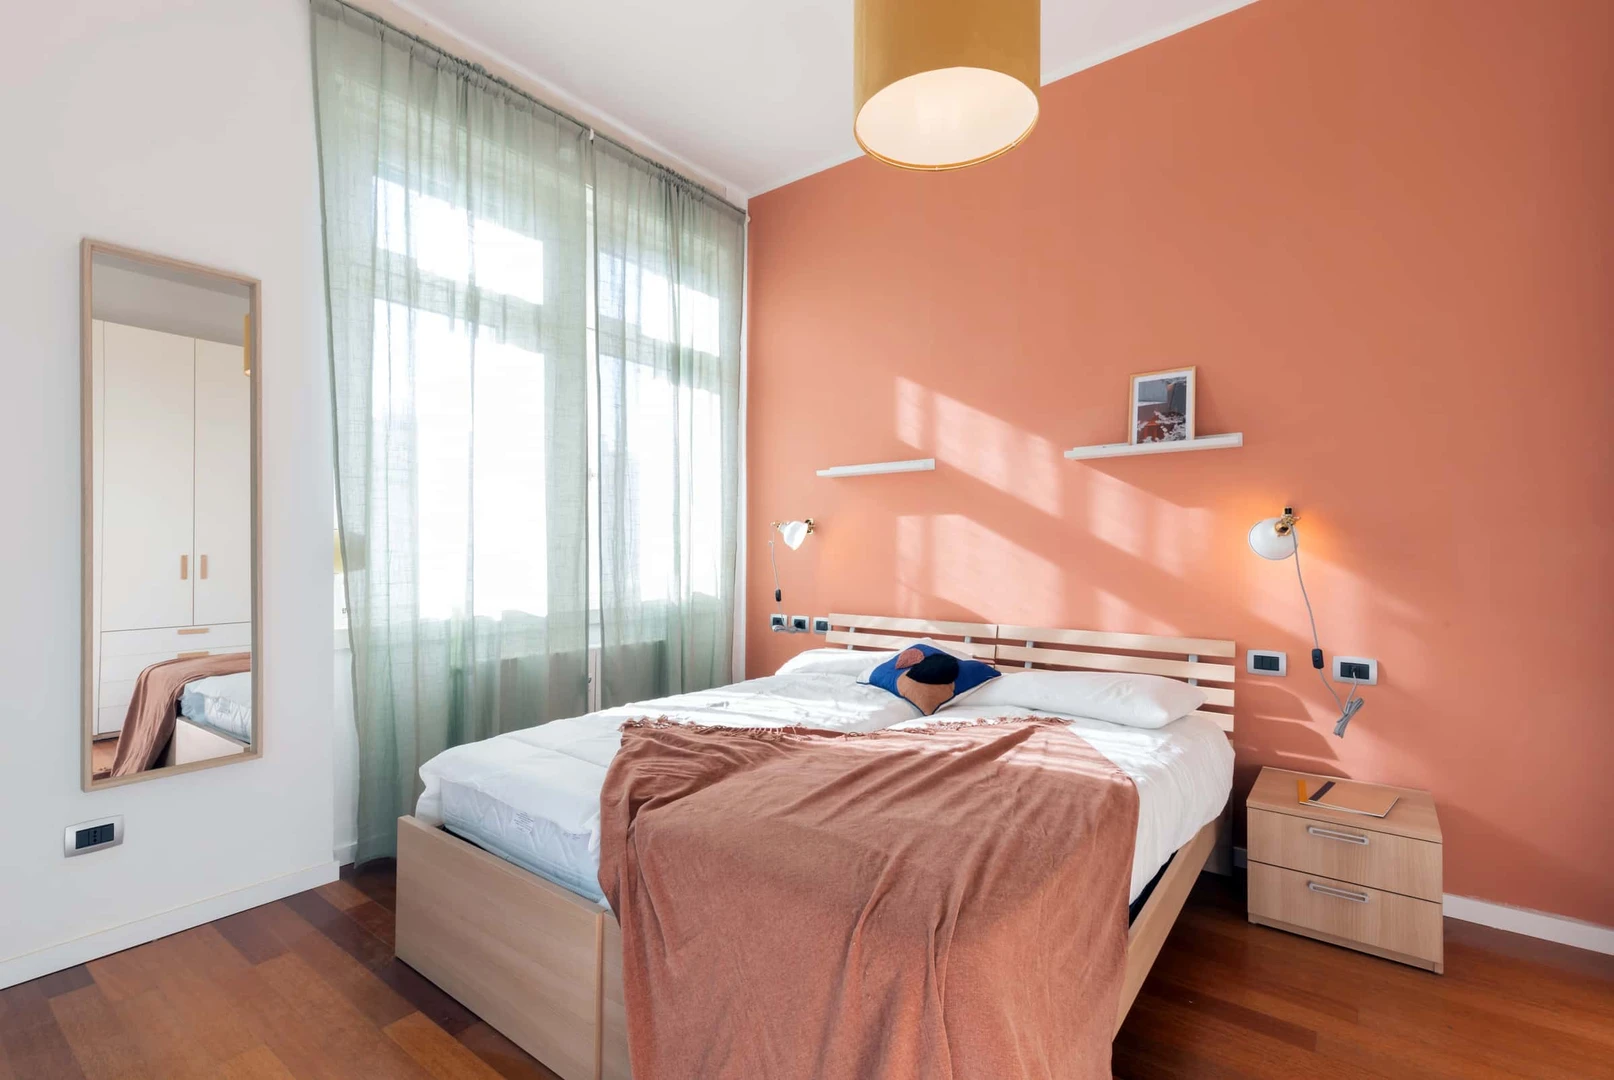 Room for rent in a shared flat in Trieste